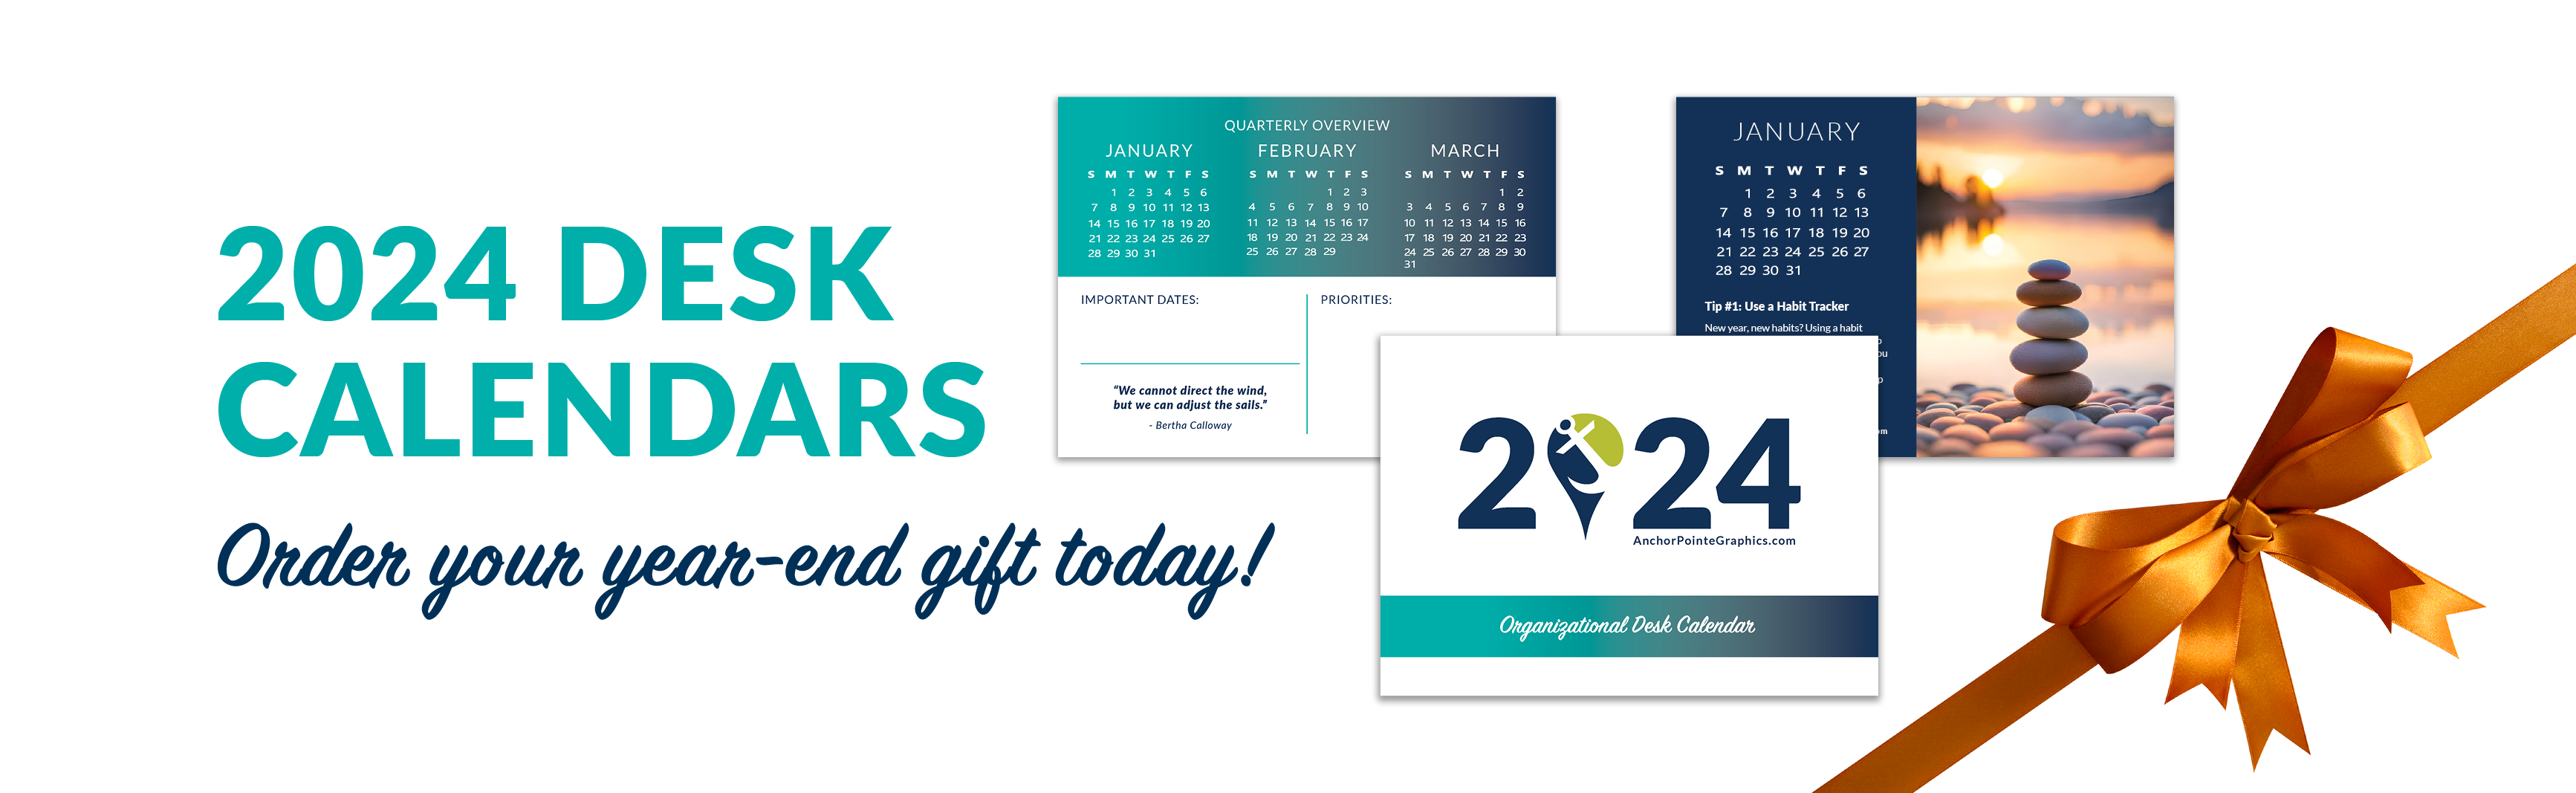 Click here to order your 2024 desk calendars!